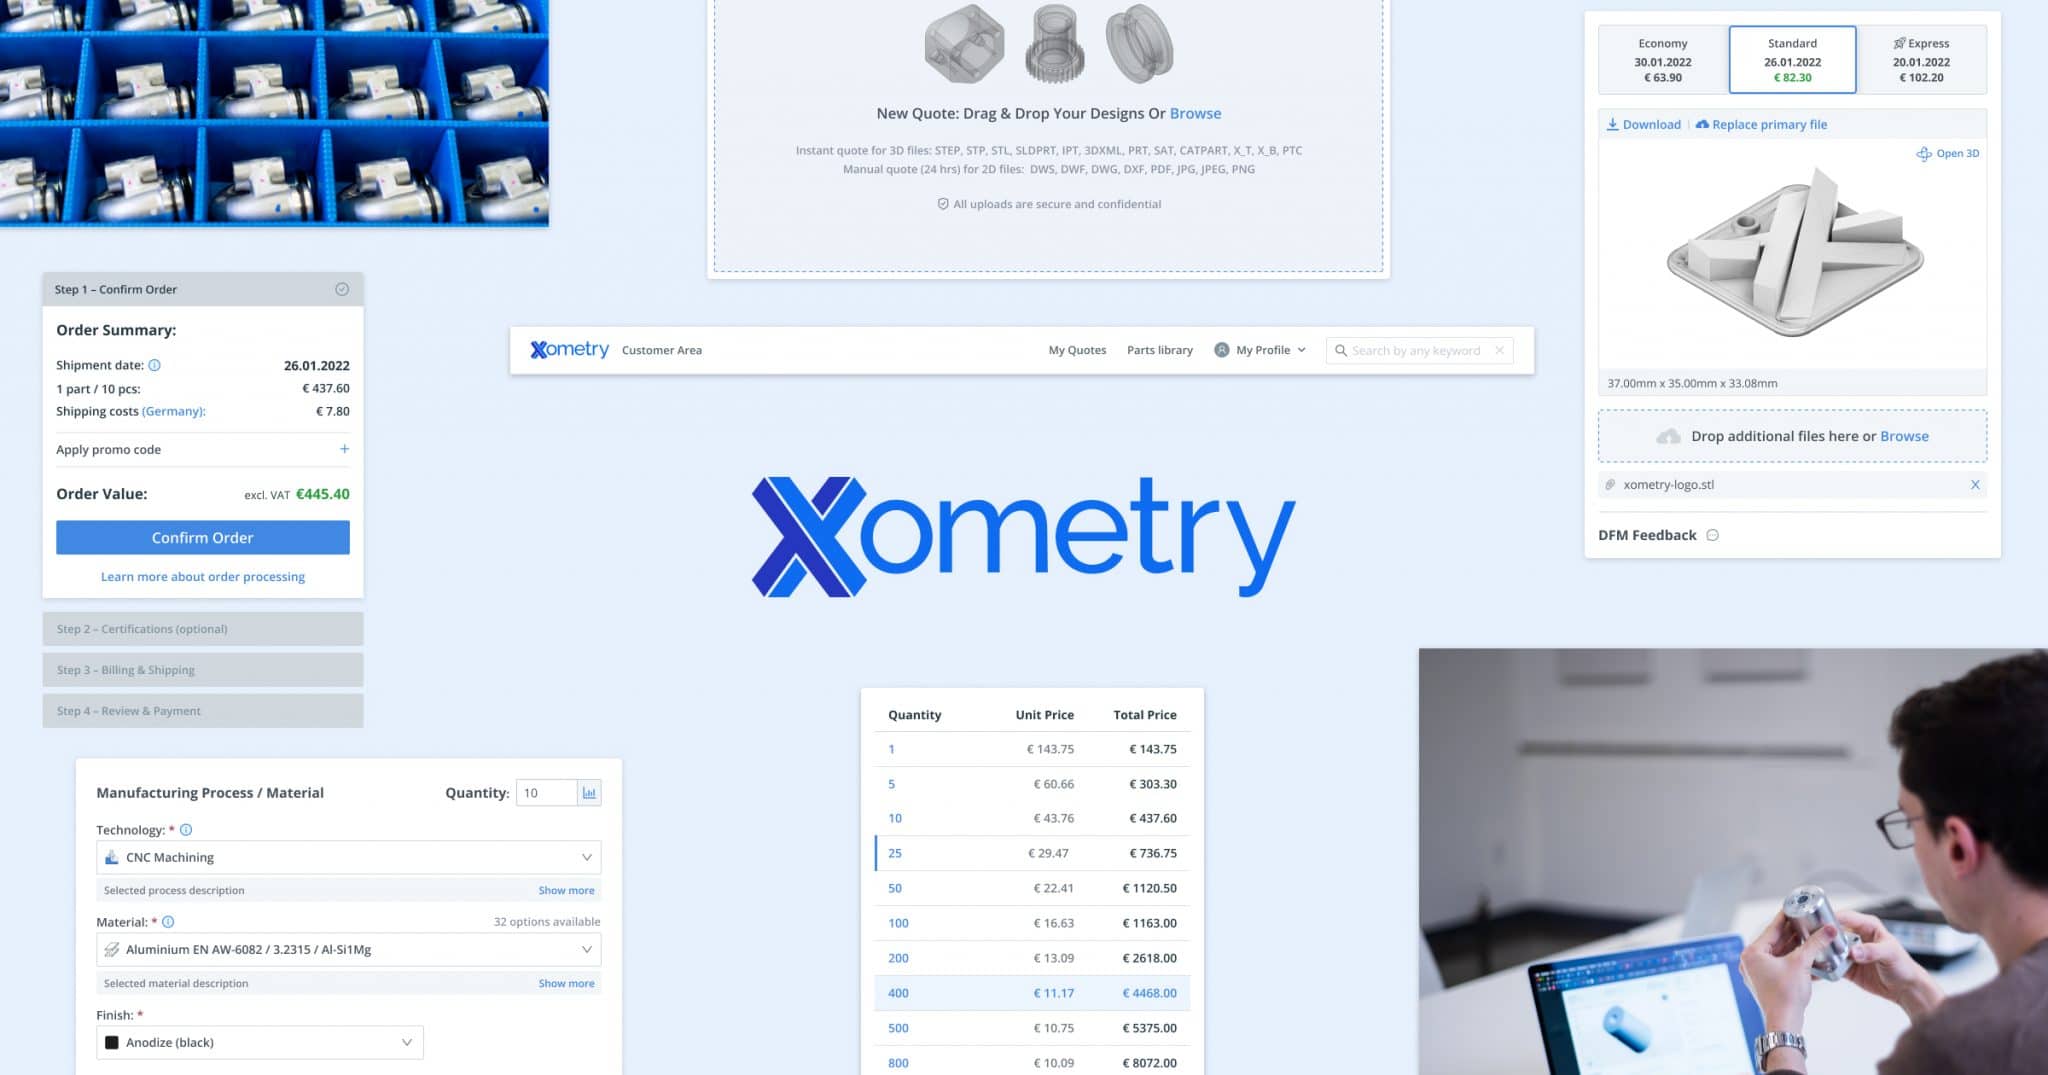 New digital products launched by Xometry AM Software